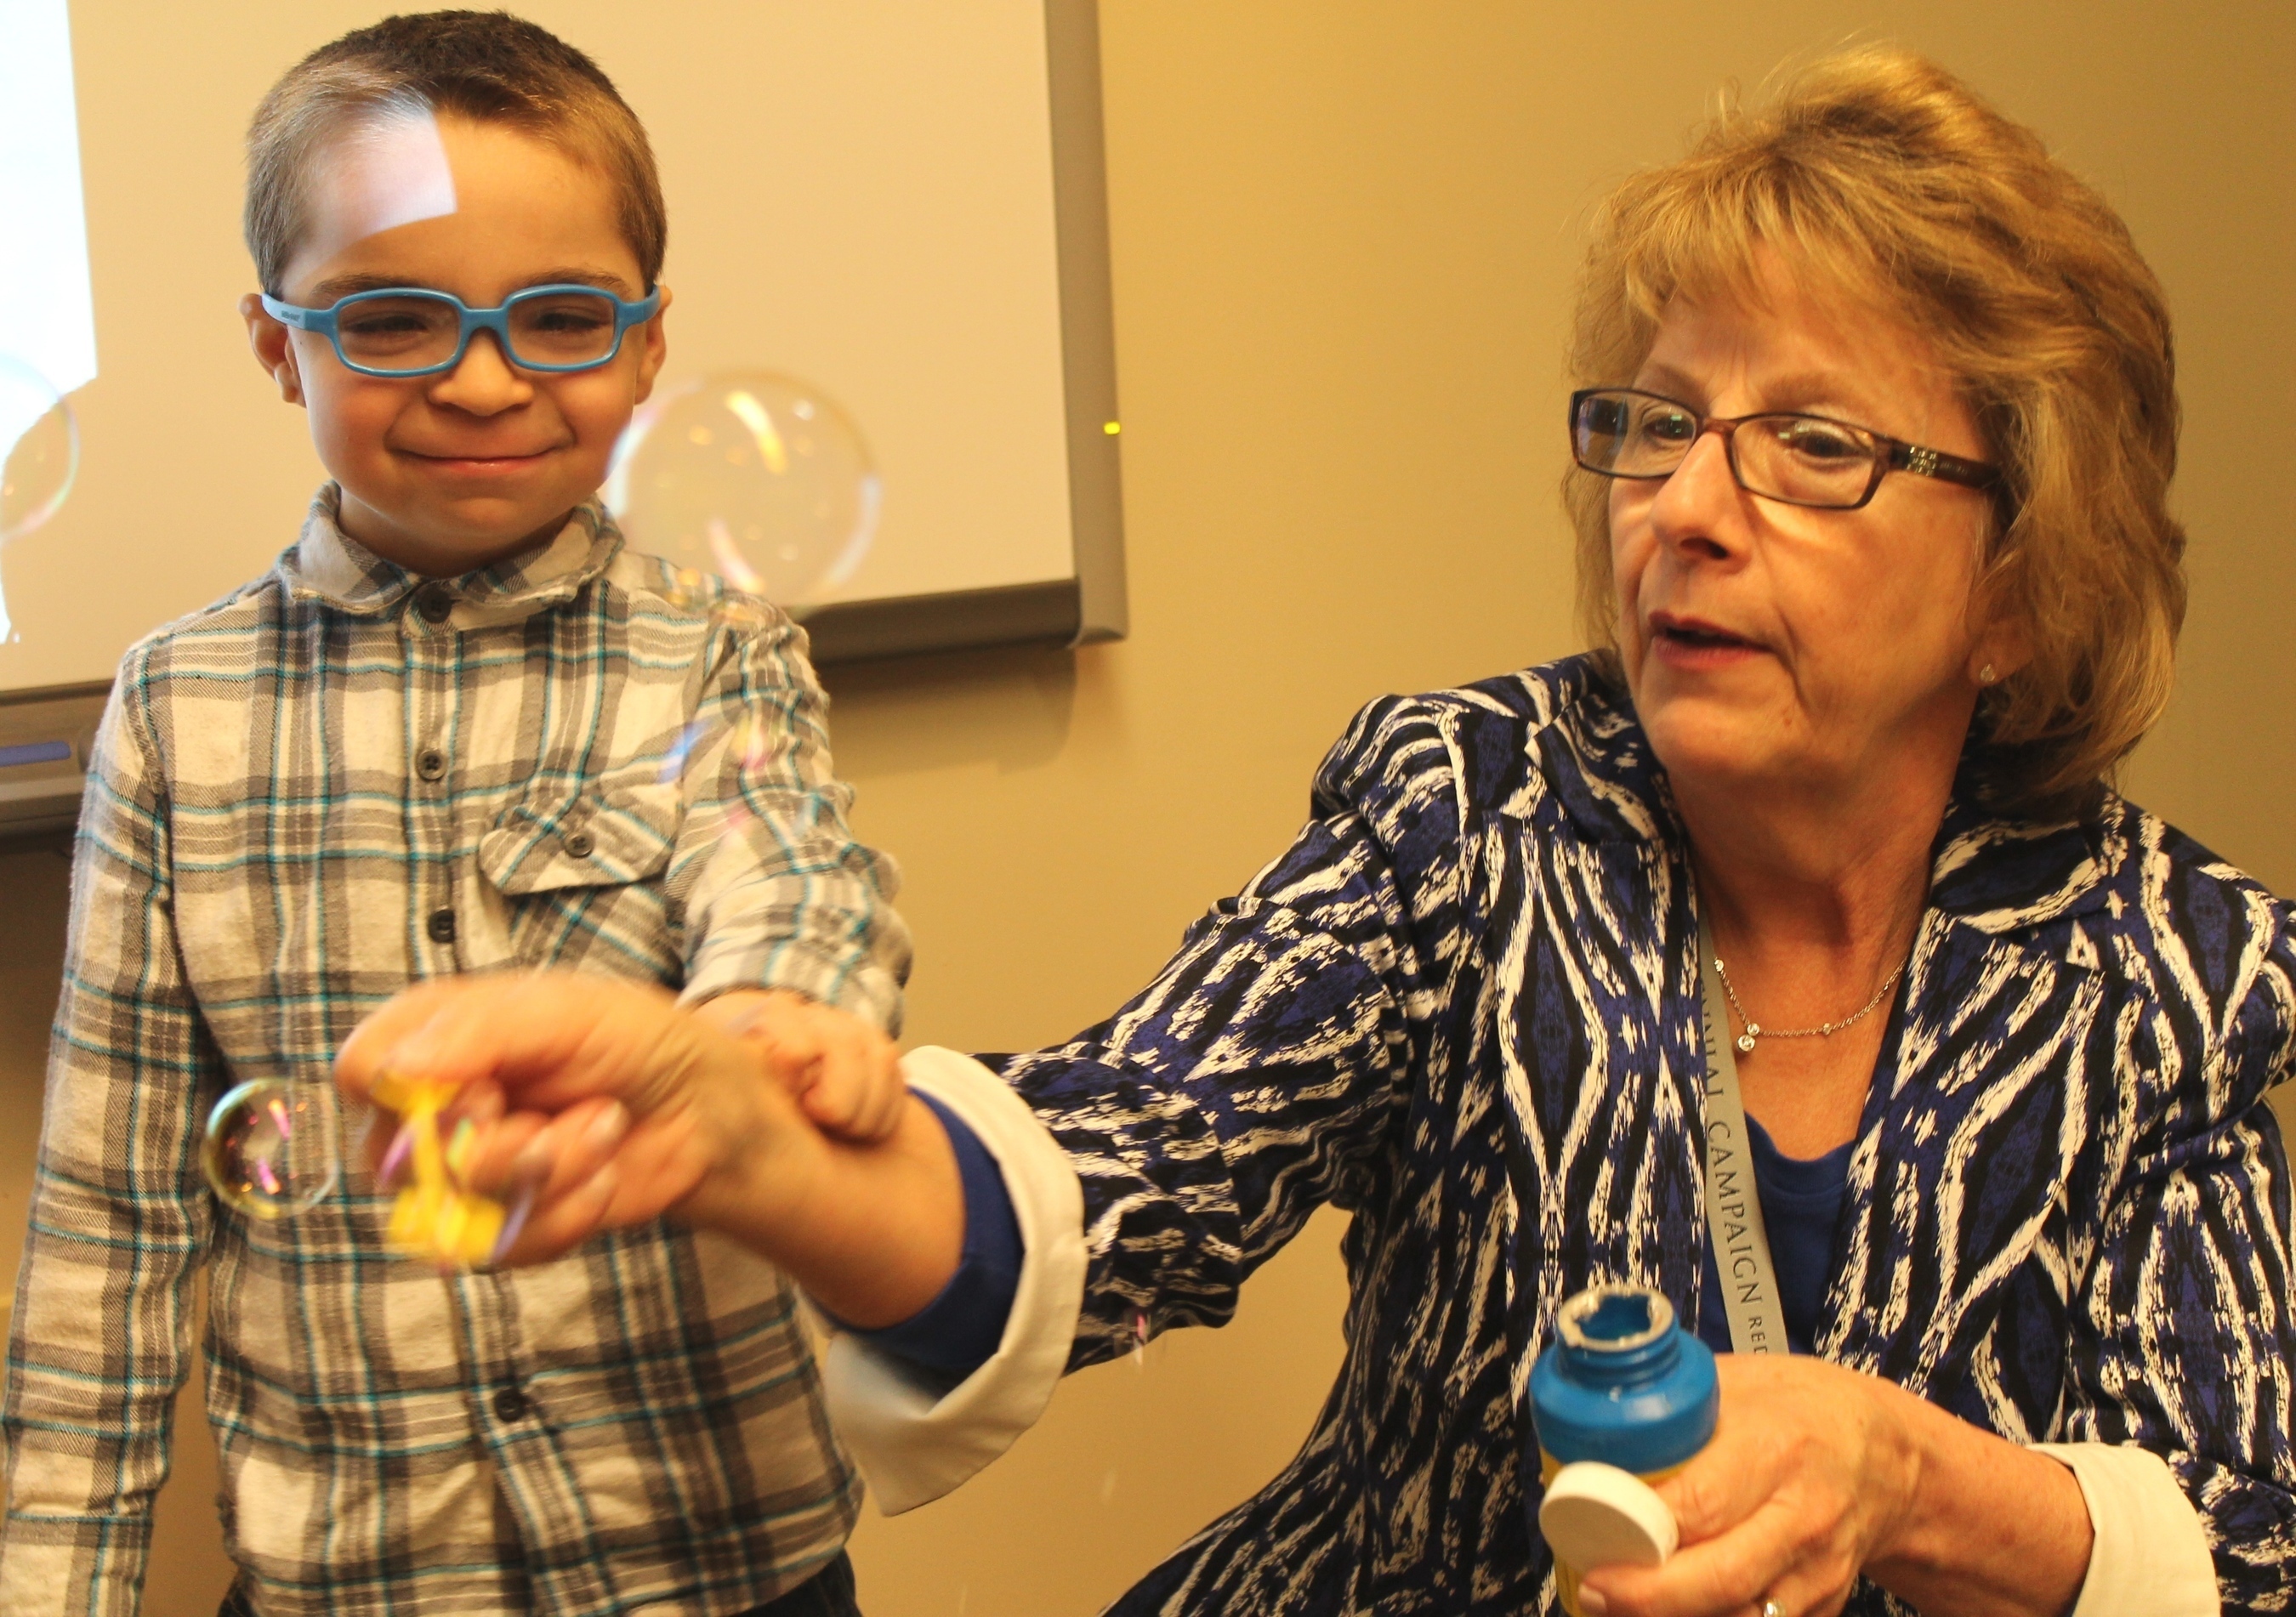 Barbara Haas-Givler, M.Ed., BCBA, trainings and consultative services/behavior consultant, ADMI, blows bubbles with 5-year-old patient Kaleb Miller during a recent visit to the Geisinger-Bucknell Autism & Developmental Medicine Center in Lewisburg, Pa. (PRNewsFoto/Geisinger Health System)